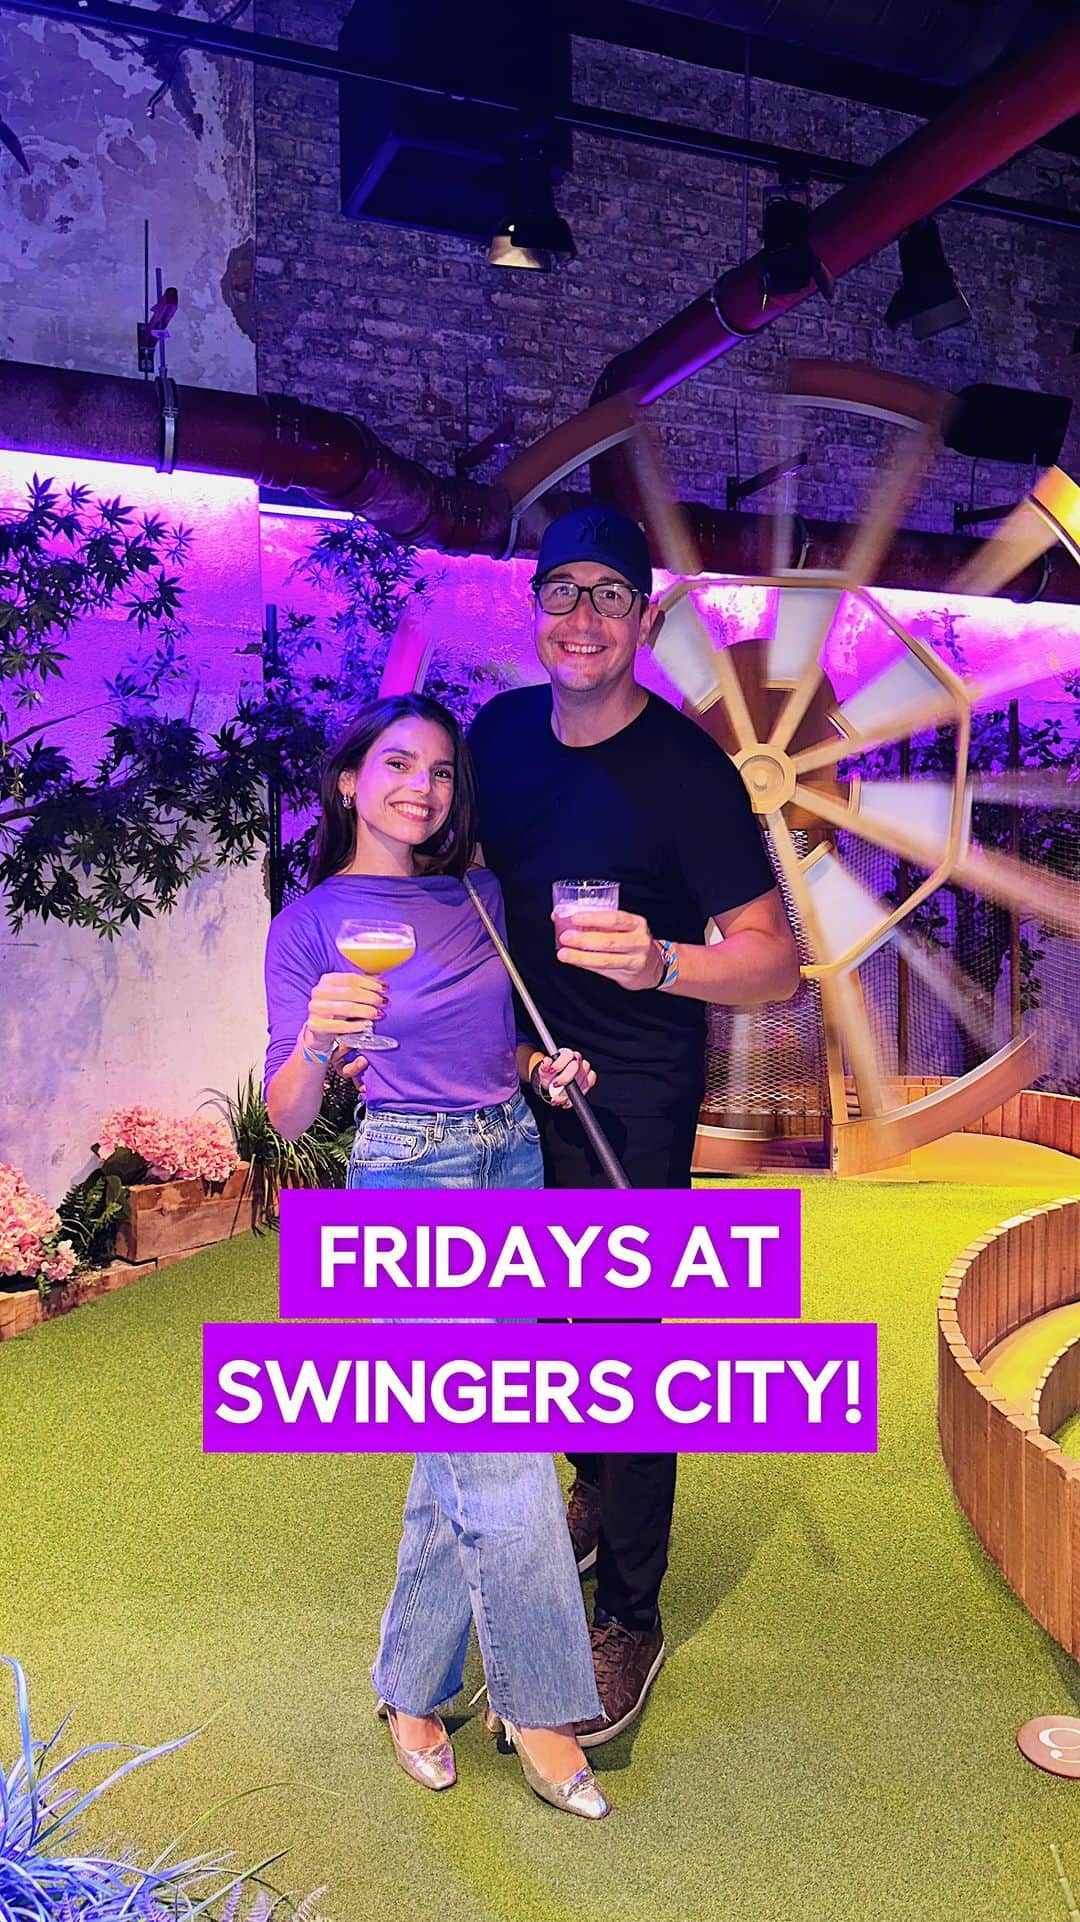 @LONDON | TAG #THISISLONDONのインスタグラム：「ad 🍹🏌🏽‍♂️ Start your weekend in style at @SwingersLDN City! 😎🏙️ Enjoy unlimited drinks every Friday - ALL DAY - with the Cocktail Set! You get:   🍹 90 minutes of unlimited drinks • ⛳ A round of crazy golf • 🌮 Epic street food • ✅ A reserved area! ✨✌🏼✨  Available ALL DAY on Fridays for £49 per person. Only at #SwingersCity – we’ll see you there! 🔥   @MrLondon @Alice.Sampo ❤️ ___________________________________________  #thisislondon #lovelondon #london #londra #londonlife #londres #uk #visitlondon #british #🇬🇧 #whattodoinlondon #londonreviewed #foodiesoflondon #londonfoodies #londonfoodie #londonfood #londonrestaurants #londonbars #londonrooftop #londonviews #thecityofldn #crazygolf #golf」